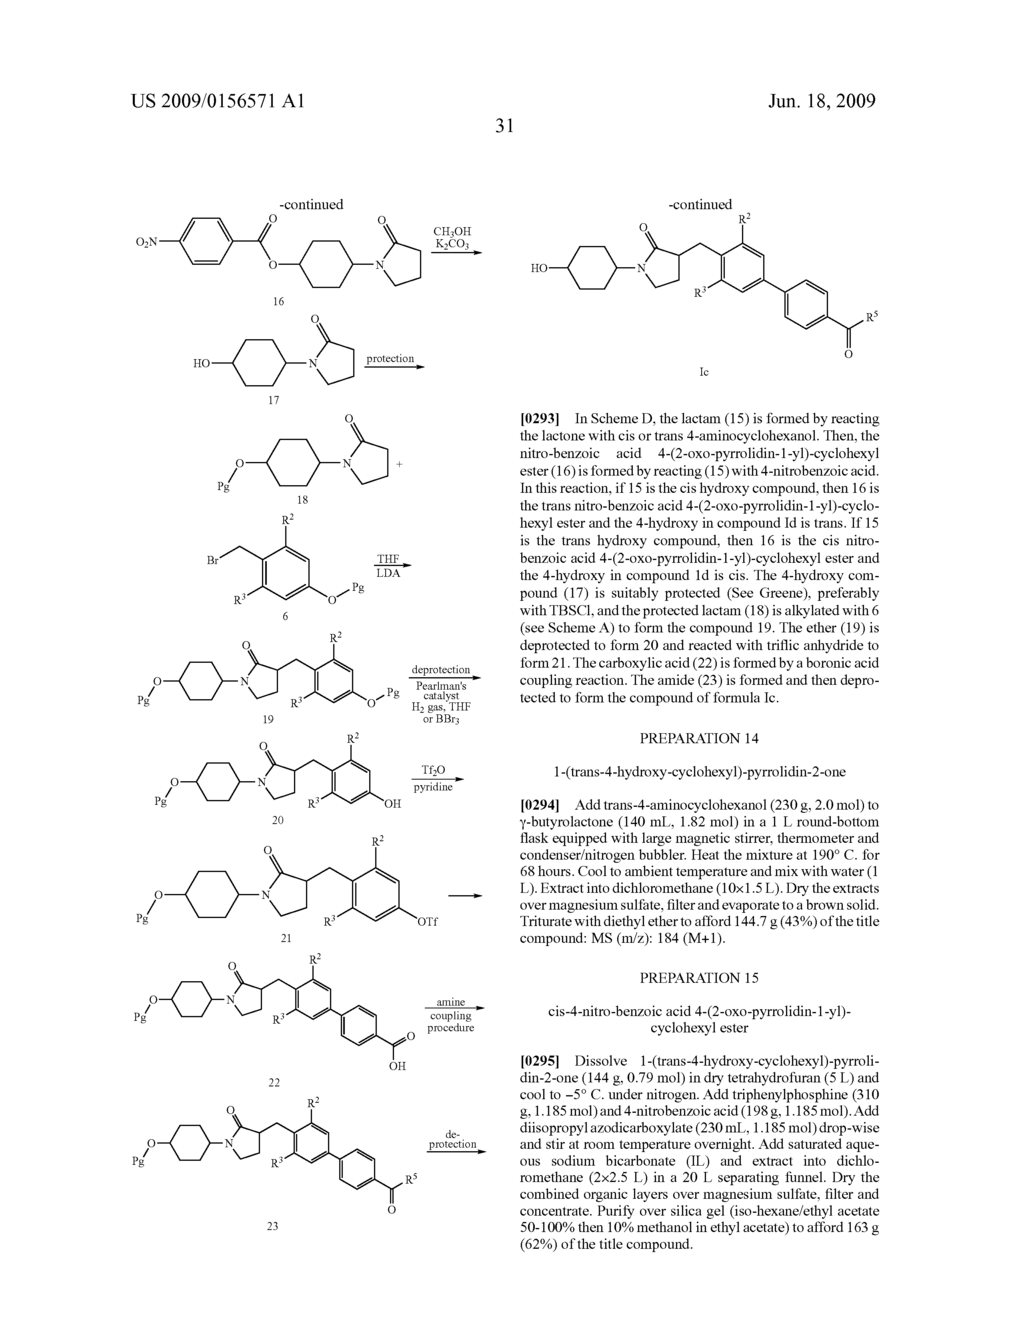 BIPHENYL AMIDE LACTAM DERIVATIVES AS INHIBITORS OF 11-BETA-HYDROXYSTEROID DEHYDROGENASE 1 - diagram, schematic, and image 32